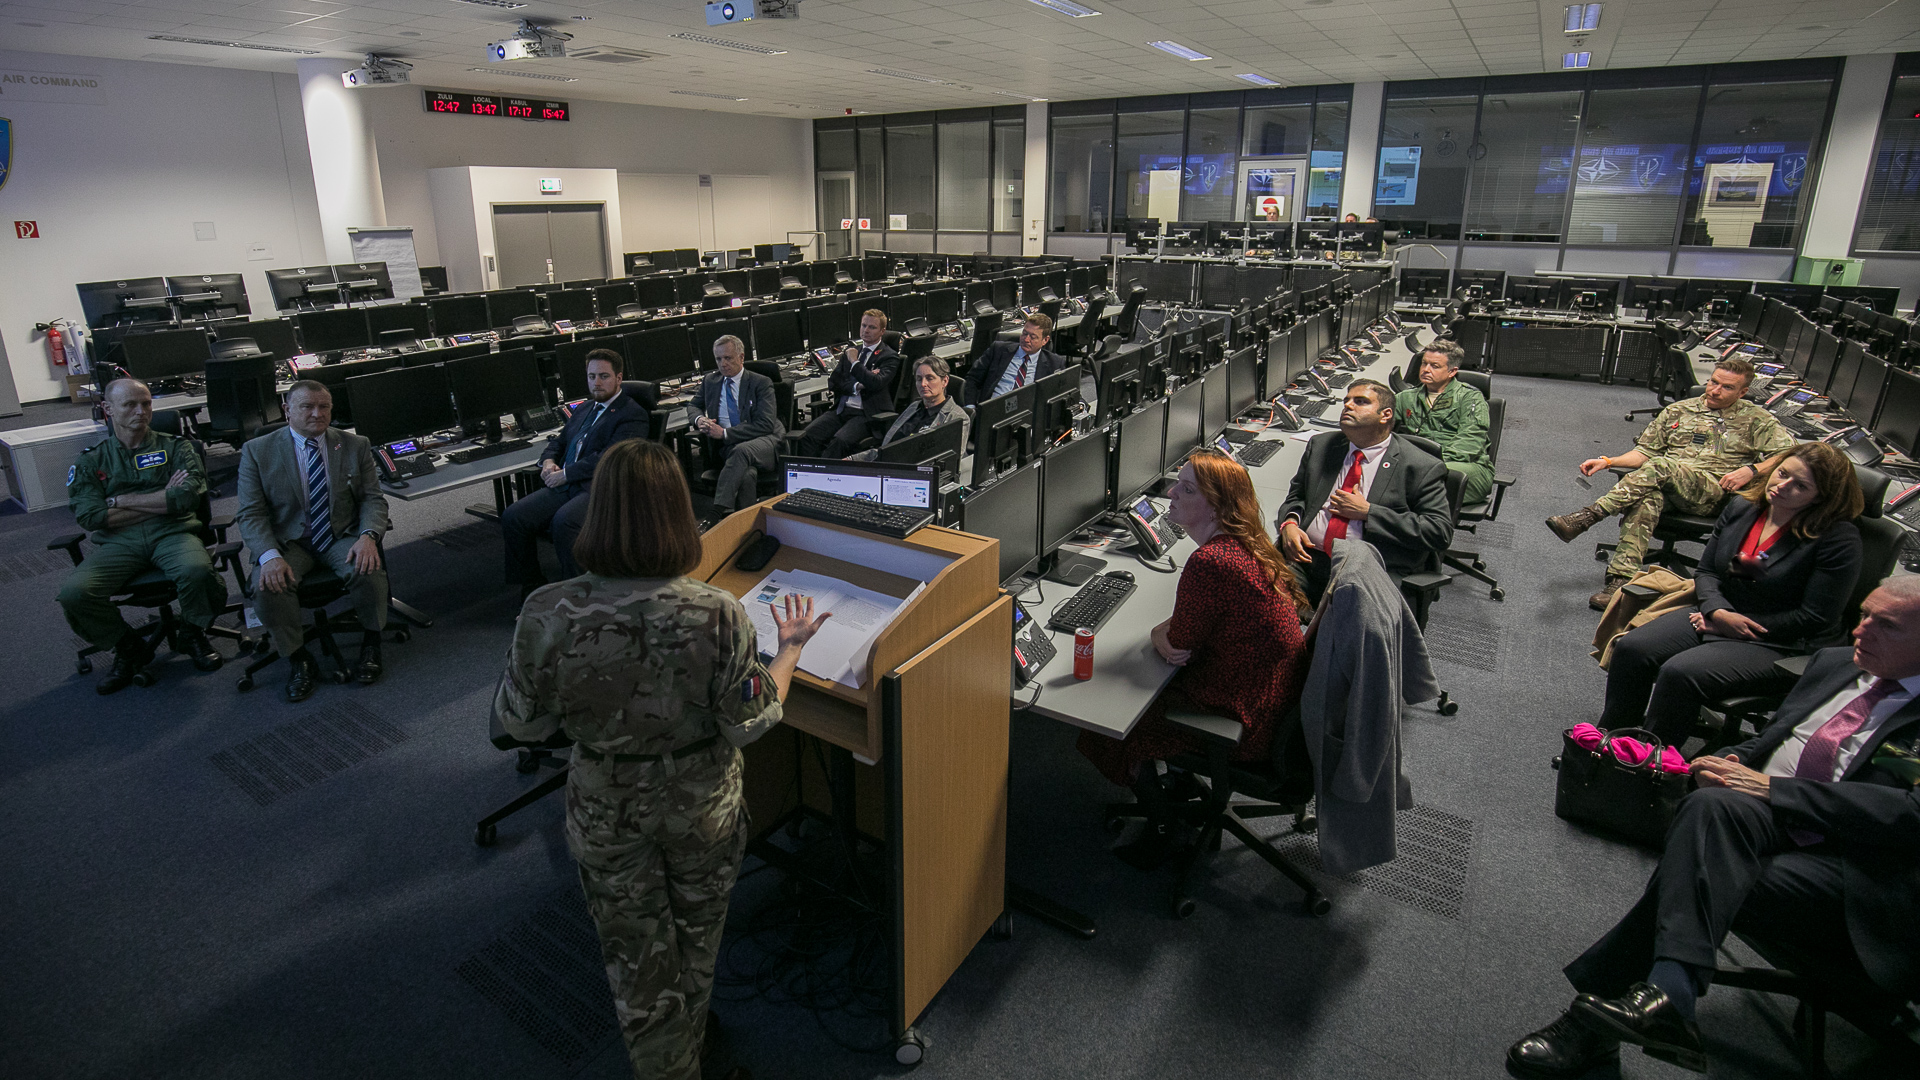 Personnel sit on chairs with computers.